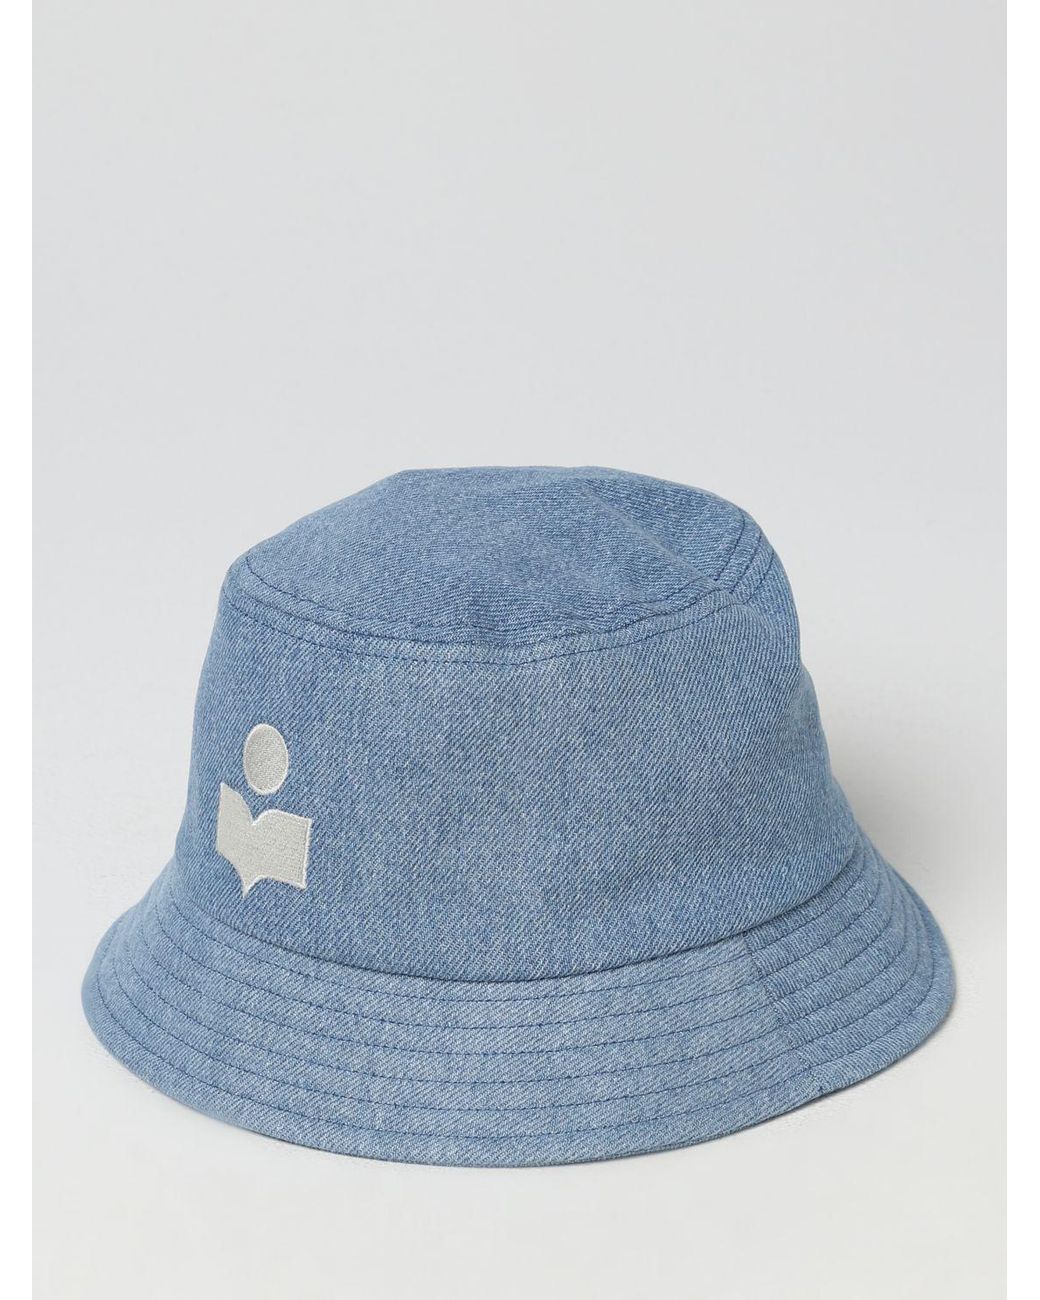 Isabel Marant Hat in Blue | Lyst